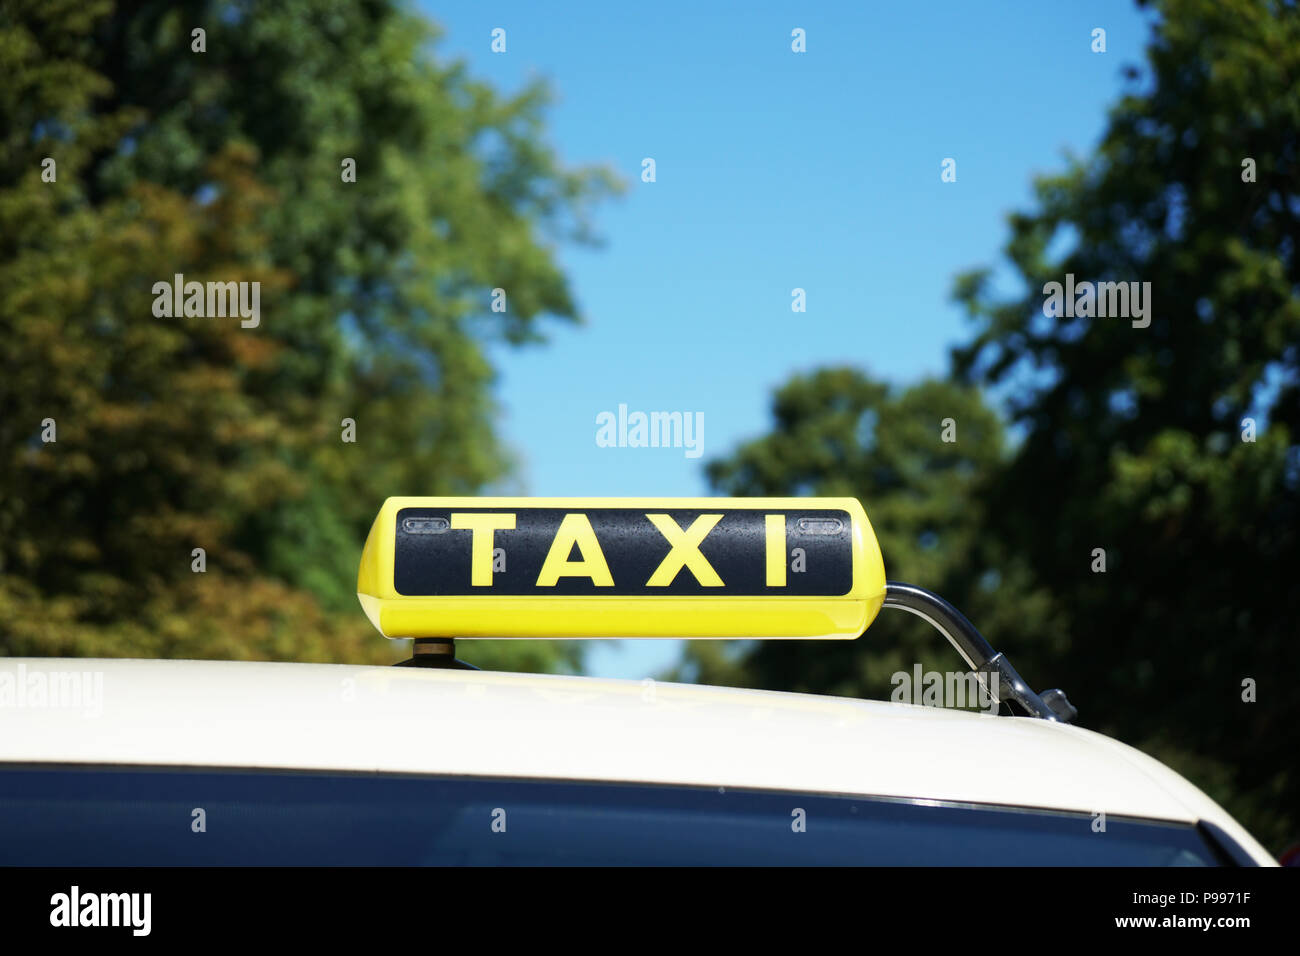 german taxi sign on car roof in Germany, travel transport concept background with copy space Stock Photo